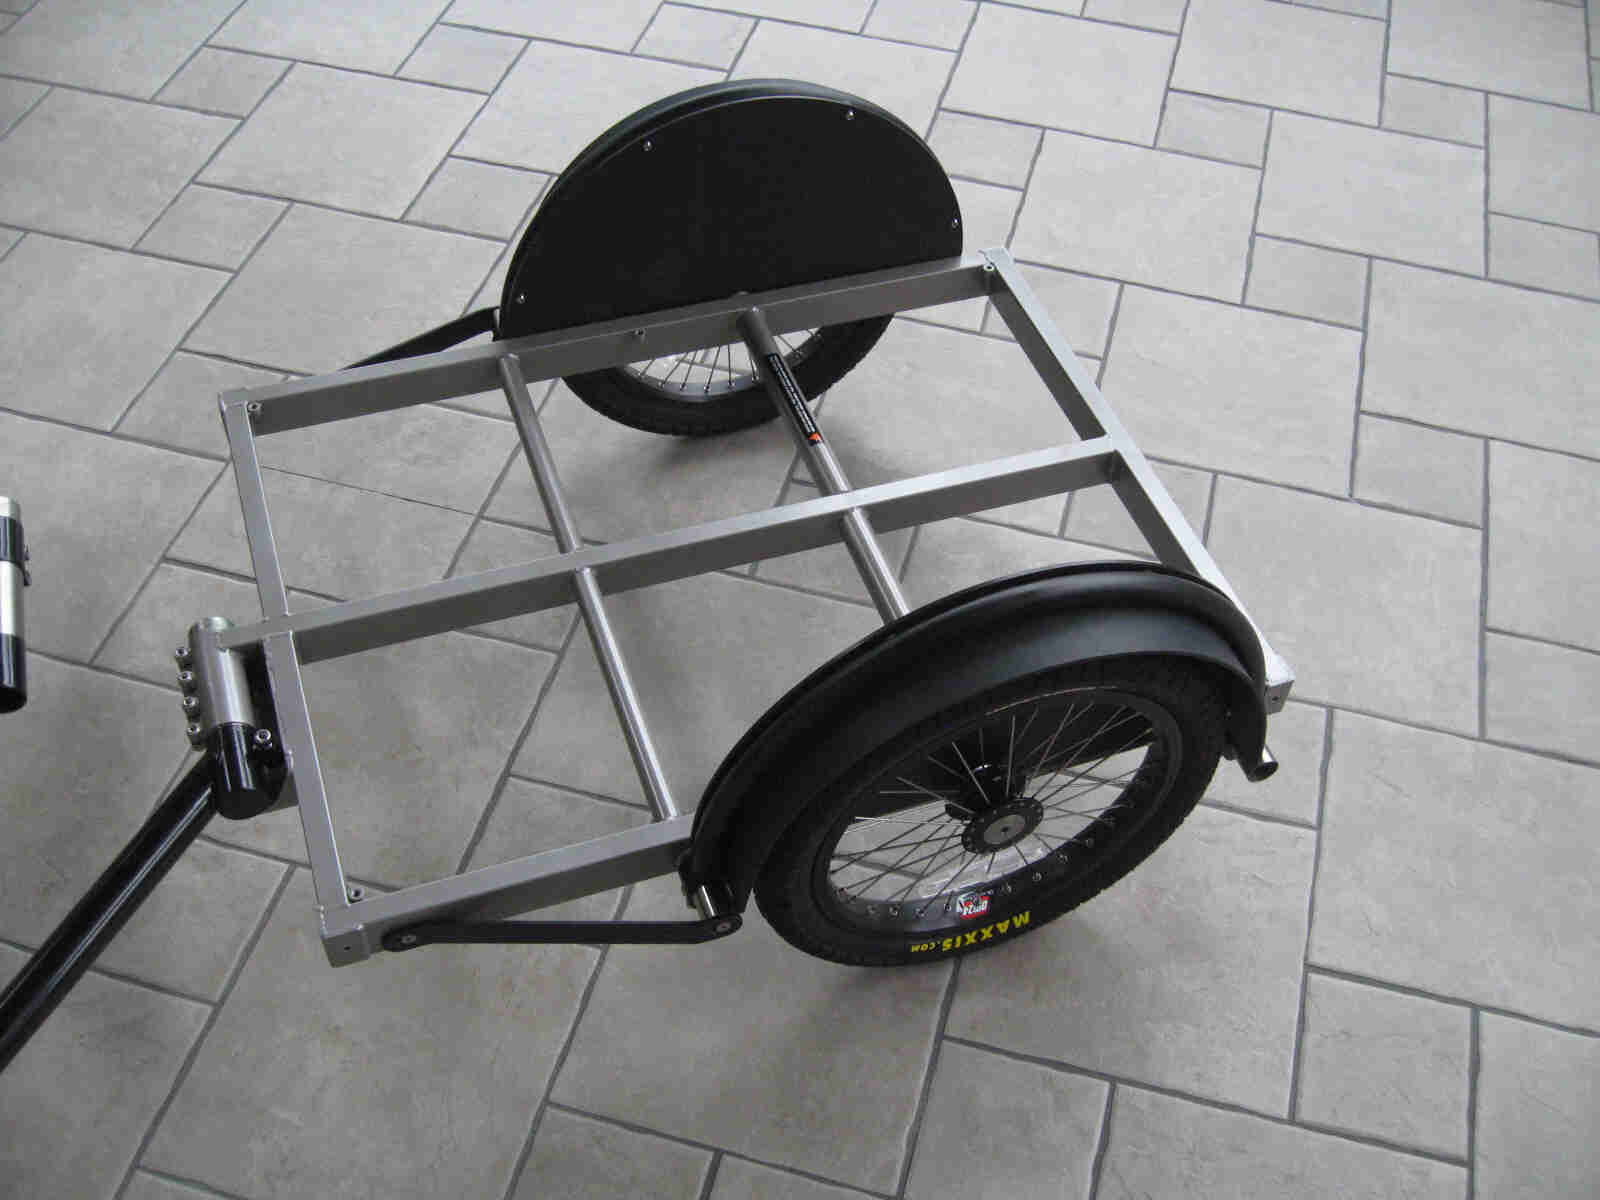 Downward, left side view of a Surly Bill or Ted bike trailer, on a tiled floor